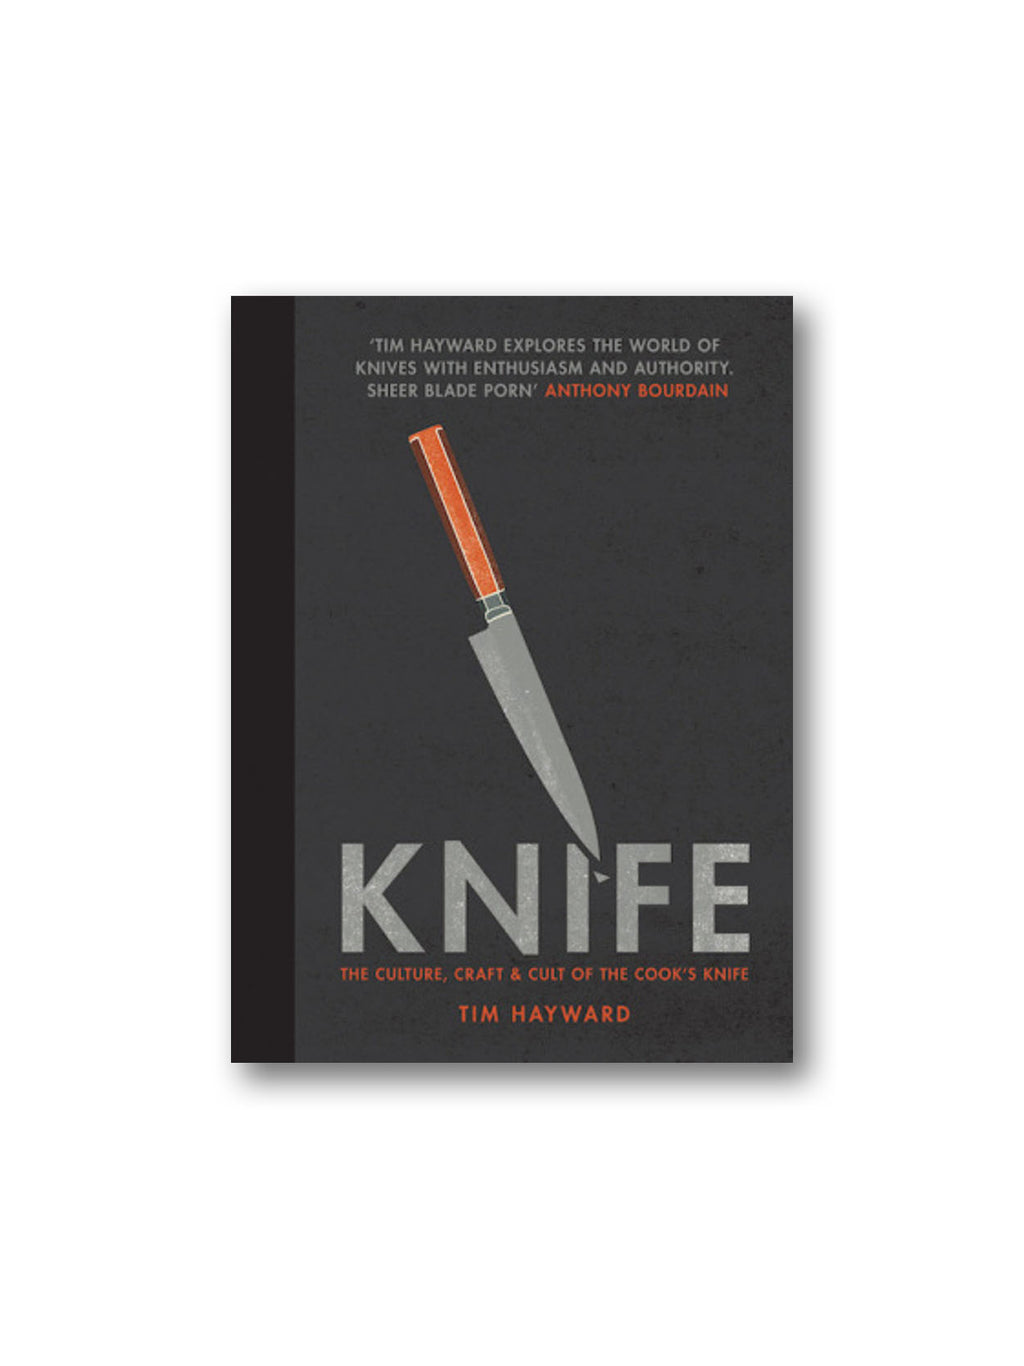 Knife : The Culture, Craft and Cult of the Cook's Knife